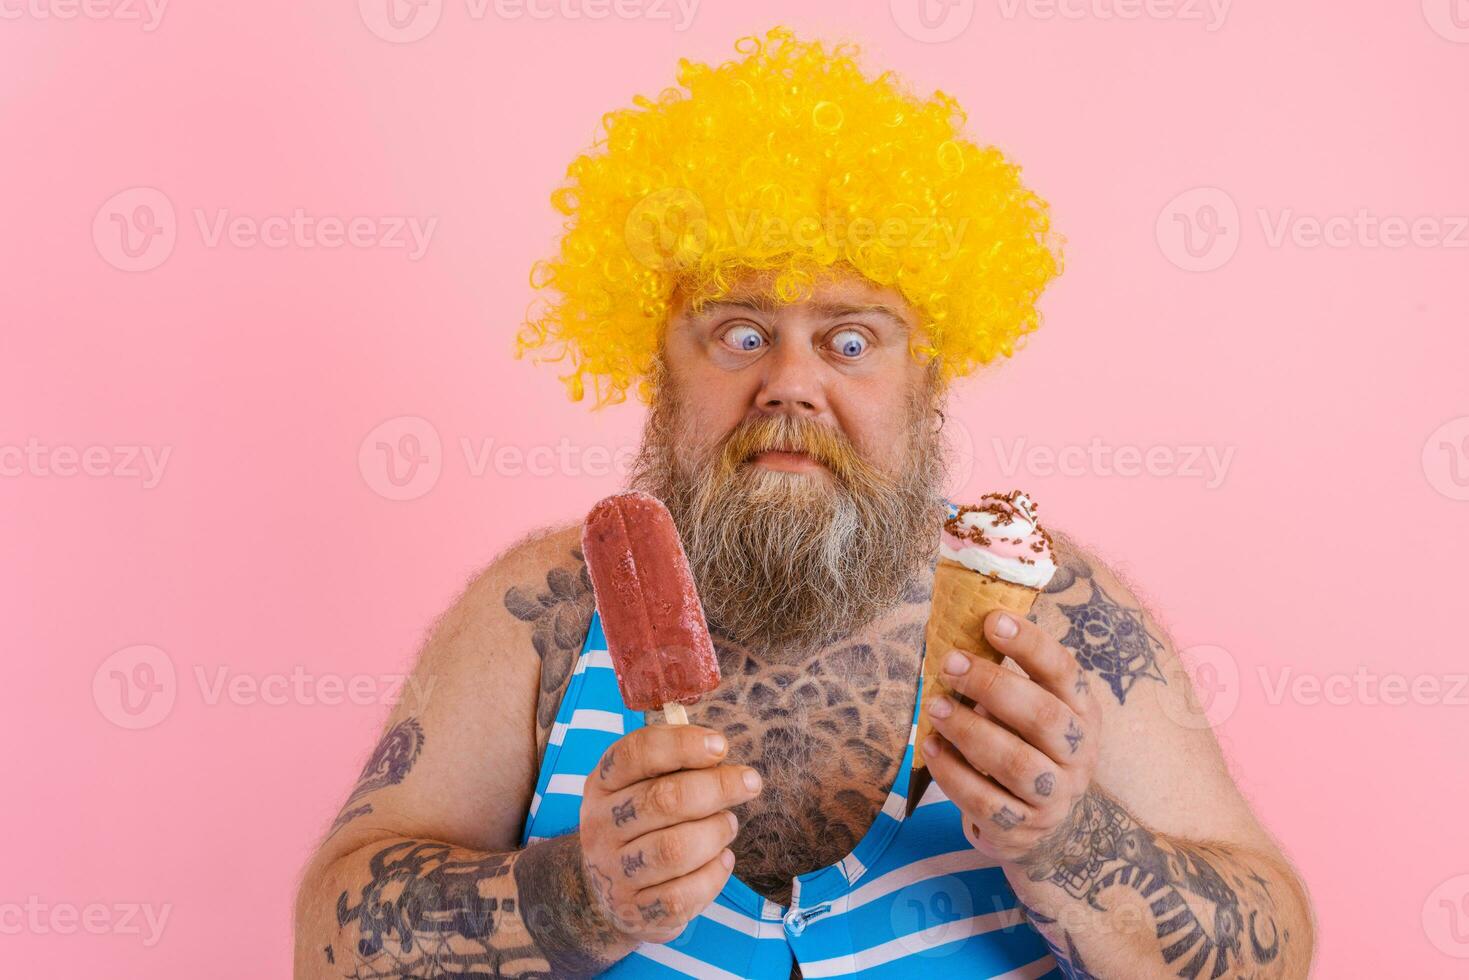 Fat man with beard and wig eats a popsicle and an icecream photo